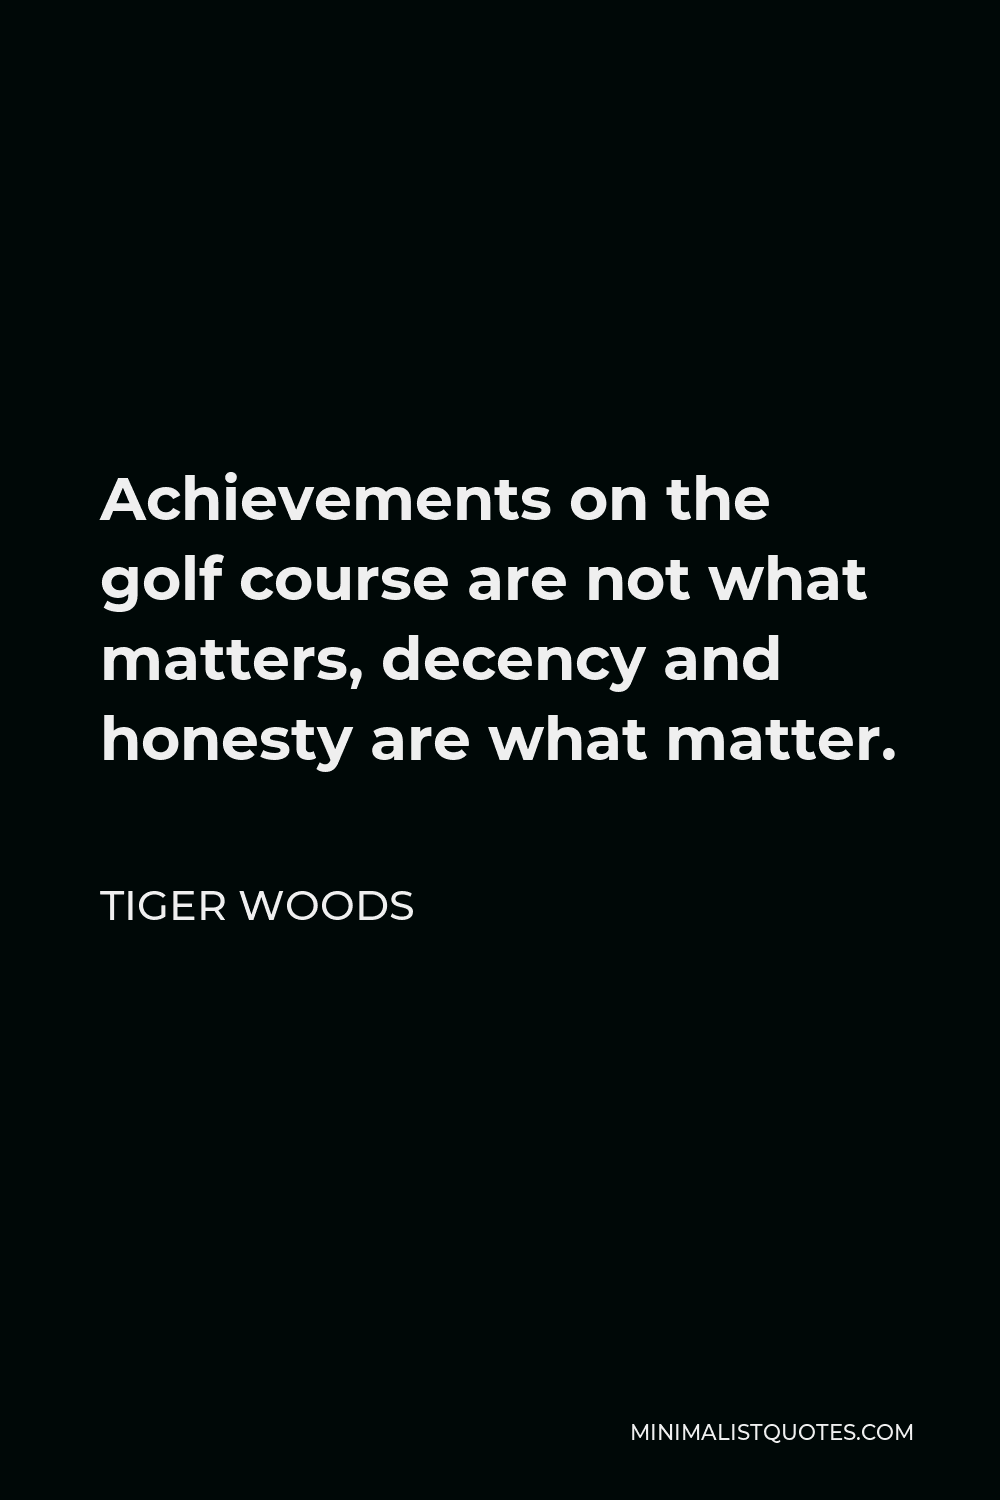 Tiger Woods Quote - Achievements on the golf course are not what matters, decency and honesty are what matter.